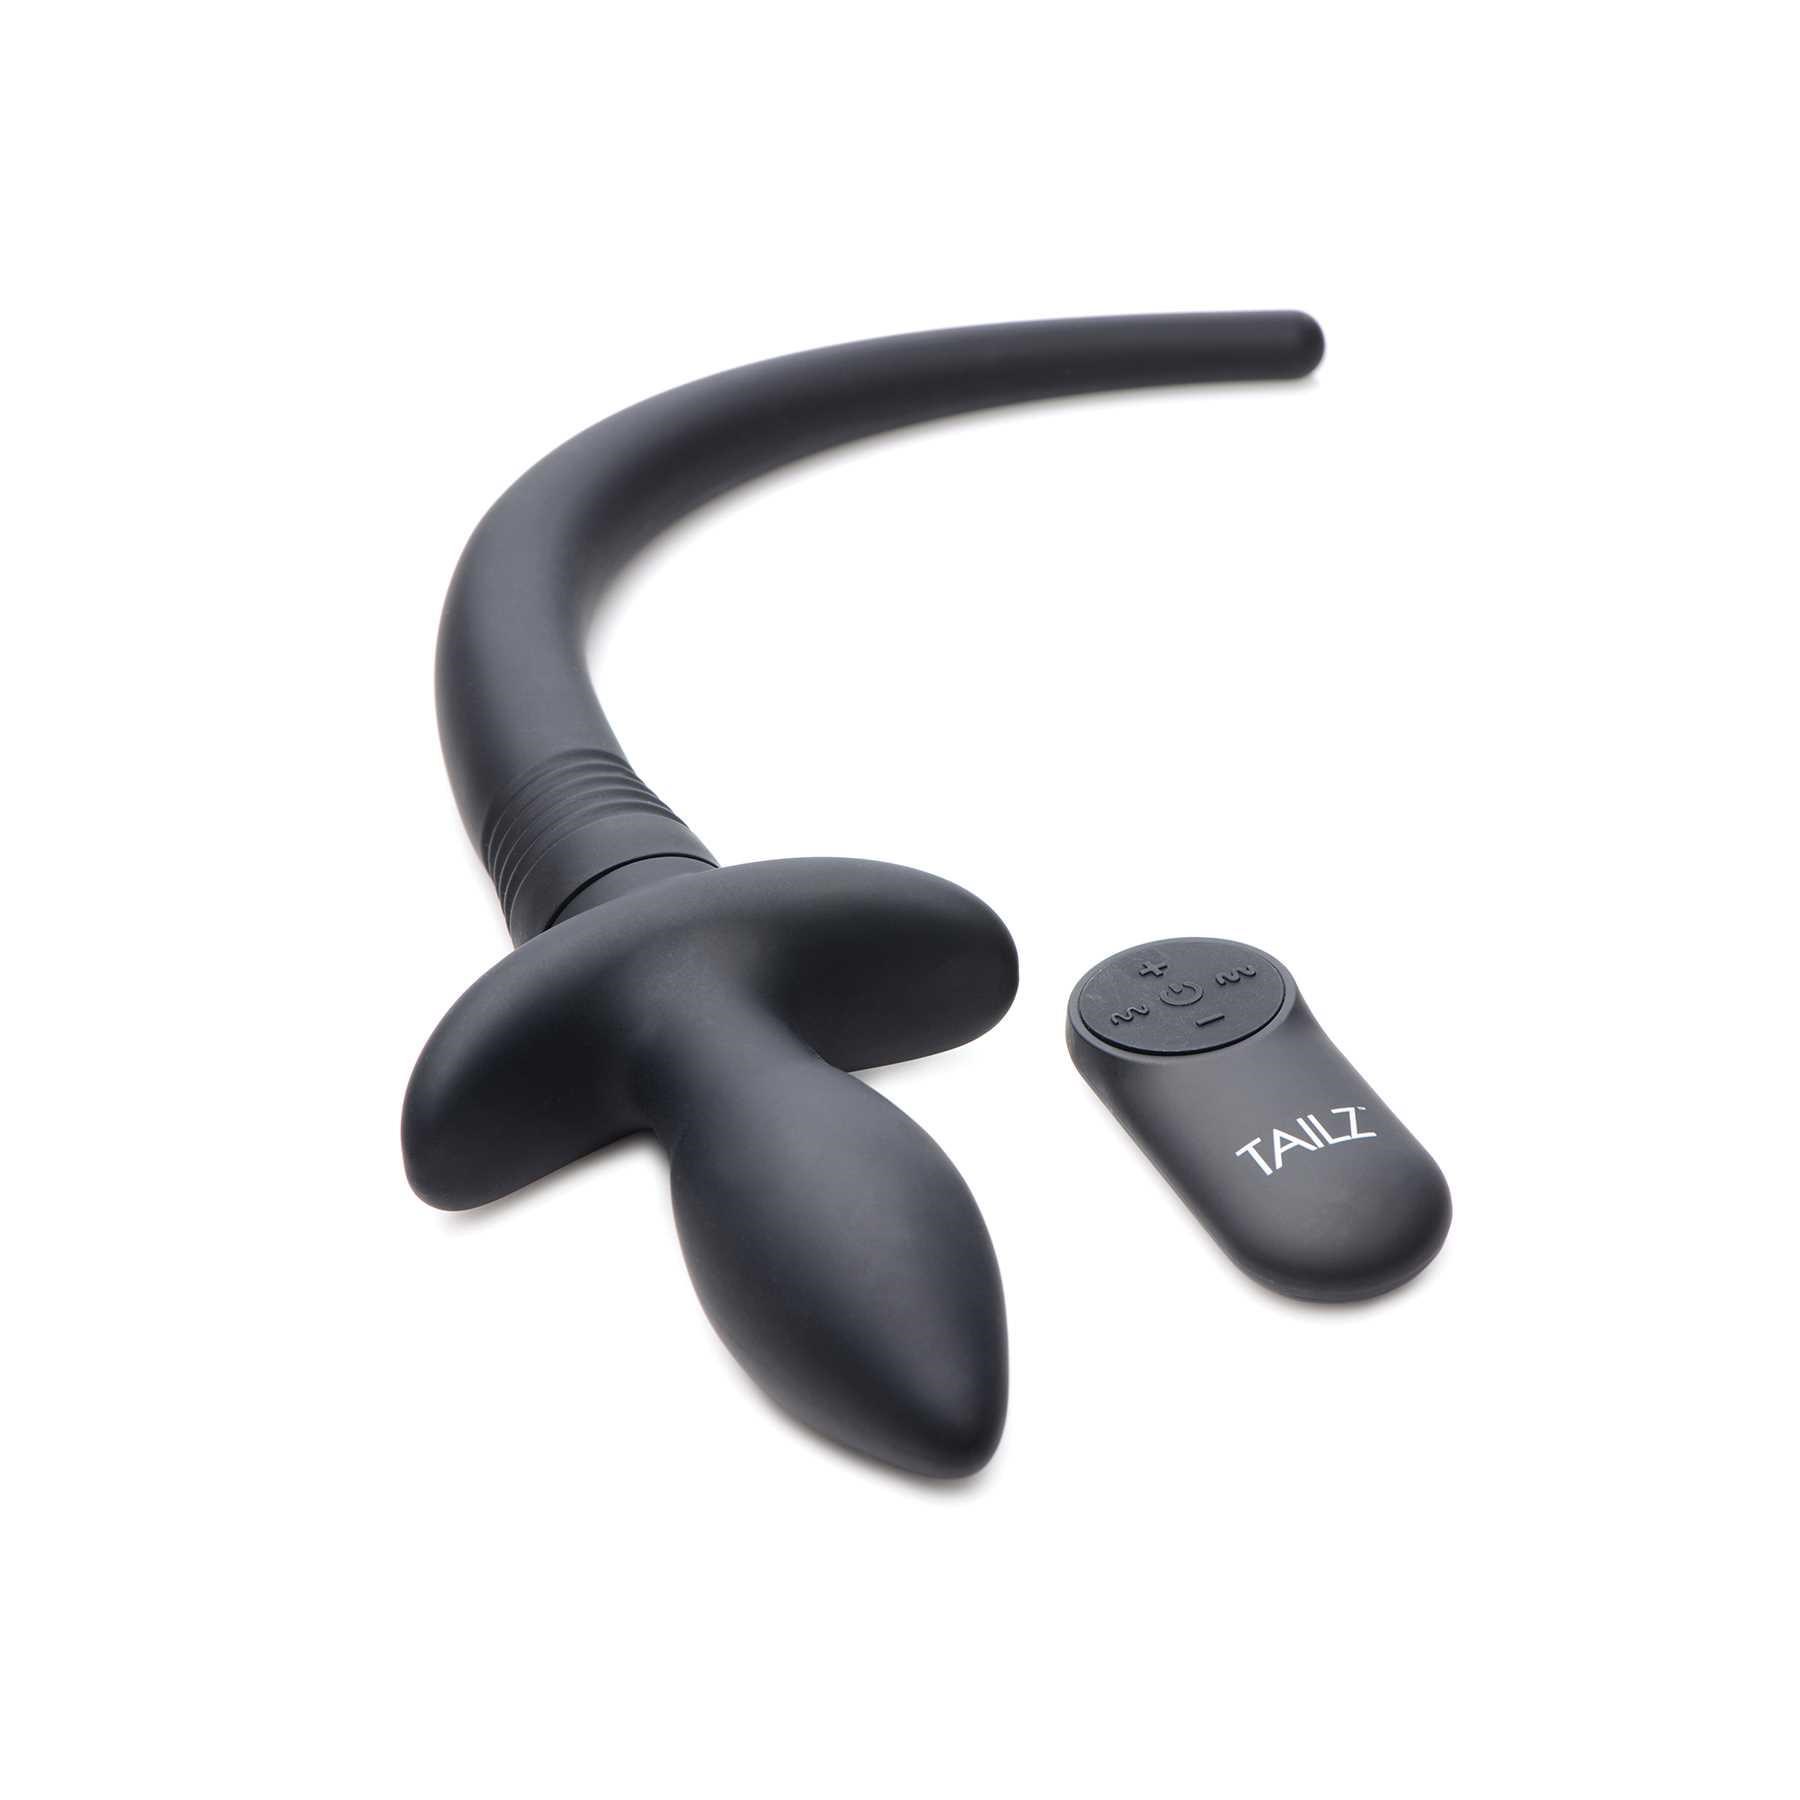 Wagging & Vibrating Puppy Tail Anal Plug showing plug and remote control